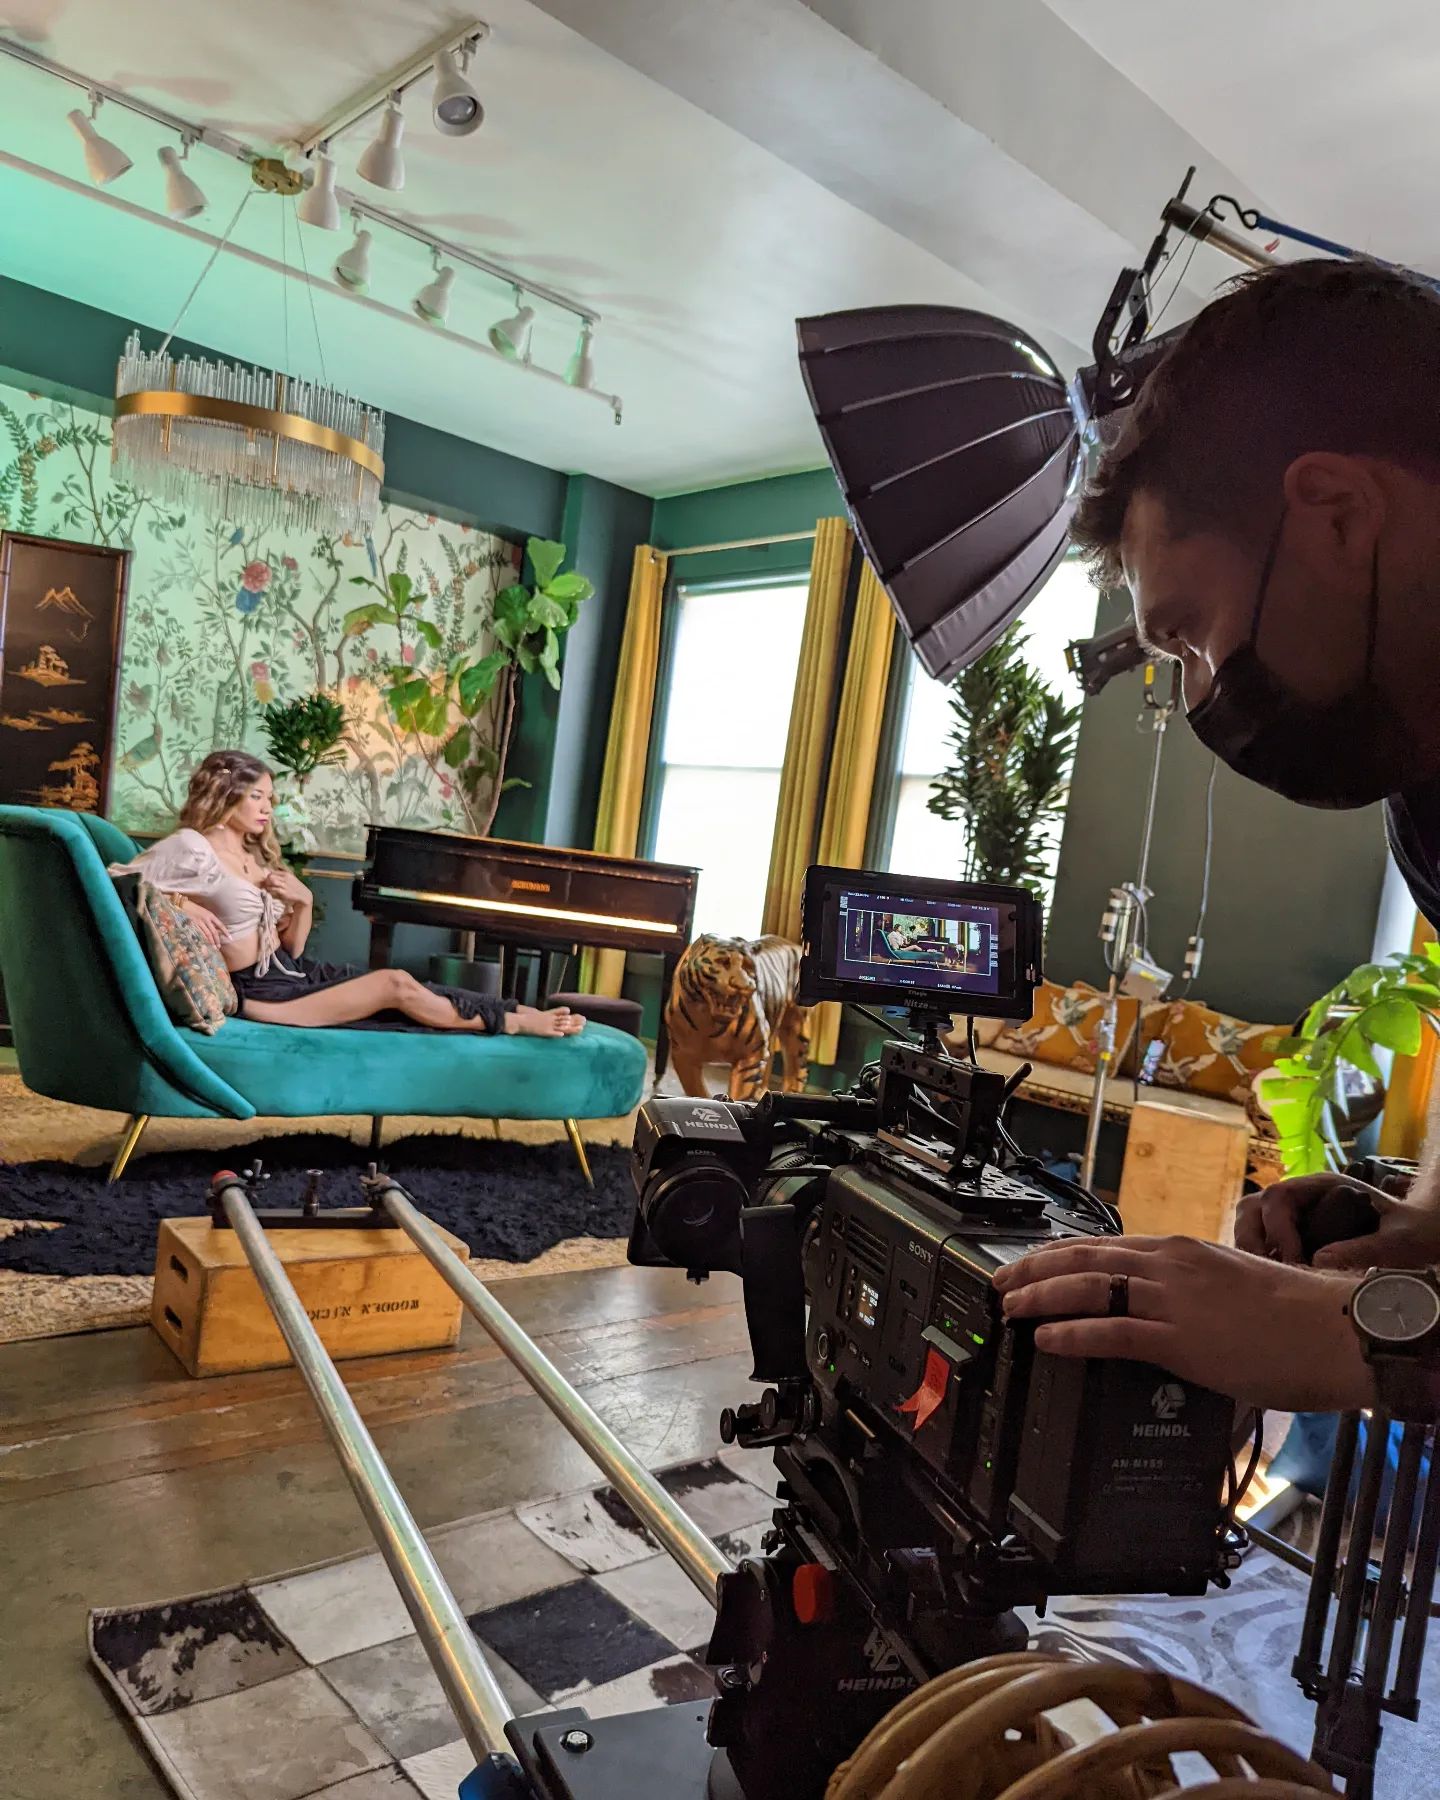 Fun new things coming soon with big ideas from @codyebbeler and @jazzynicolecollins 👀

#dp #dop #directorofphotography #commercial #cinematographer #cine #cinema #onset #setlife #filmlife #filmgrind #filmset #film #bts #behindthescenes #camera #cameraop #sony #sonyvenice #anamorphic #danadolly #aputute #cinegear #filmgear #video #easyrig #cameraporn #tilta #nucleusm